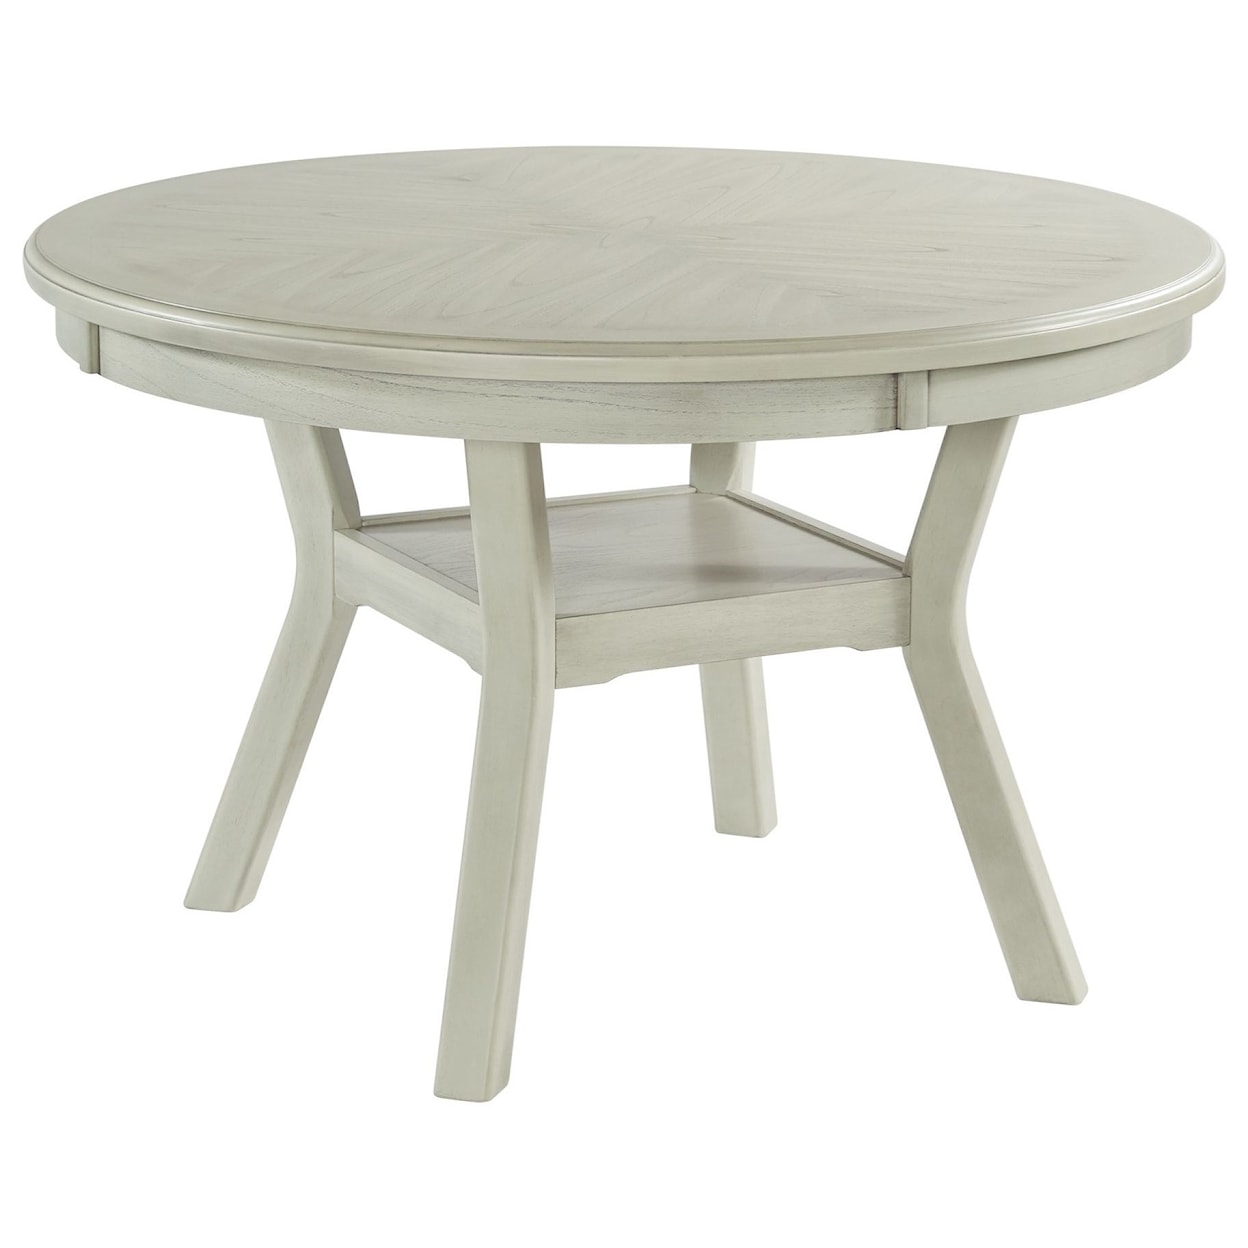 Elements International Amherst Standard Height Dining Table